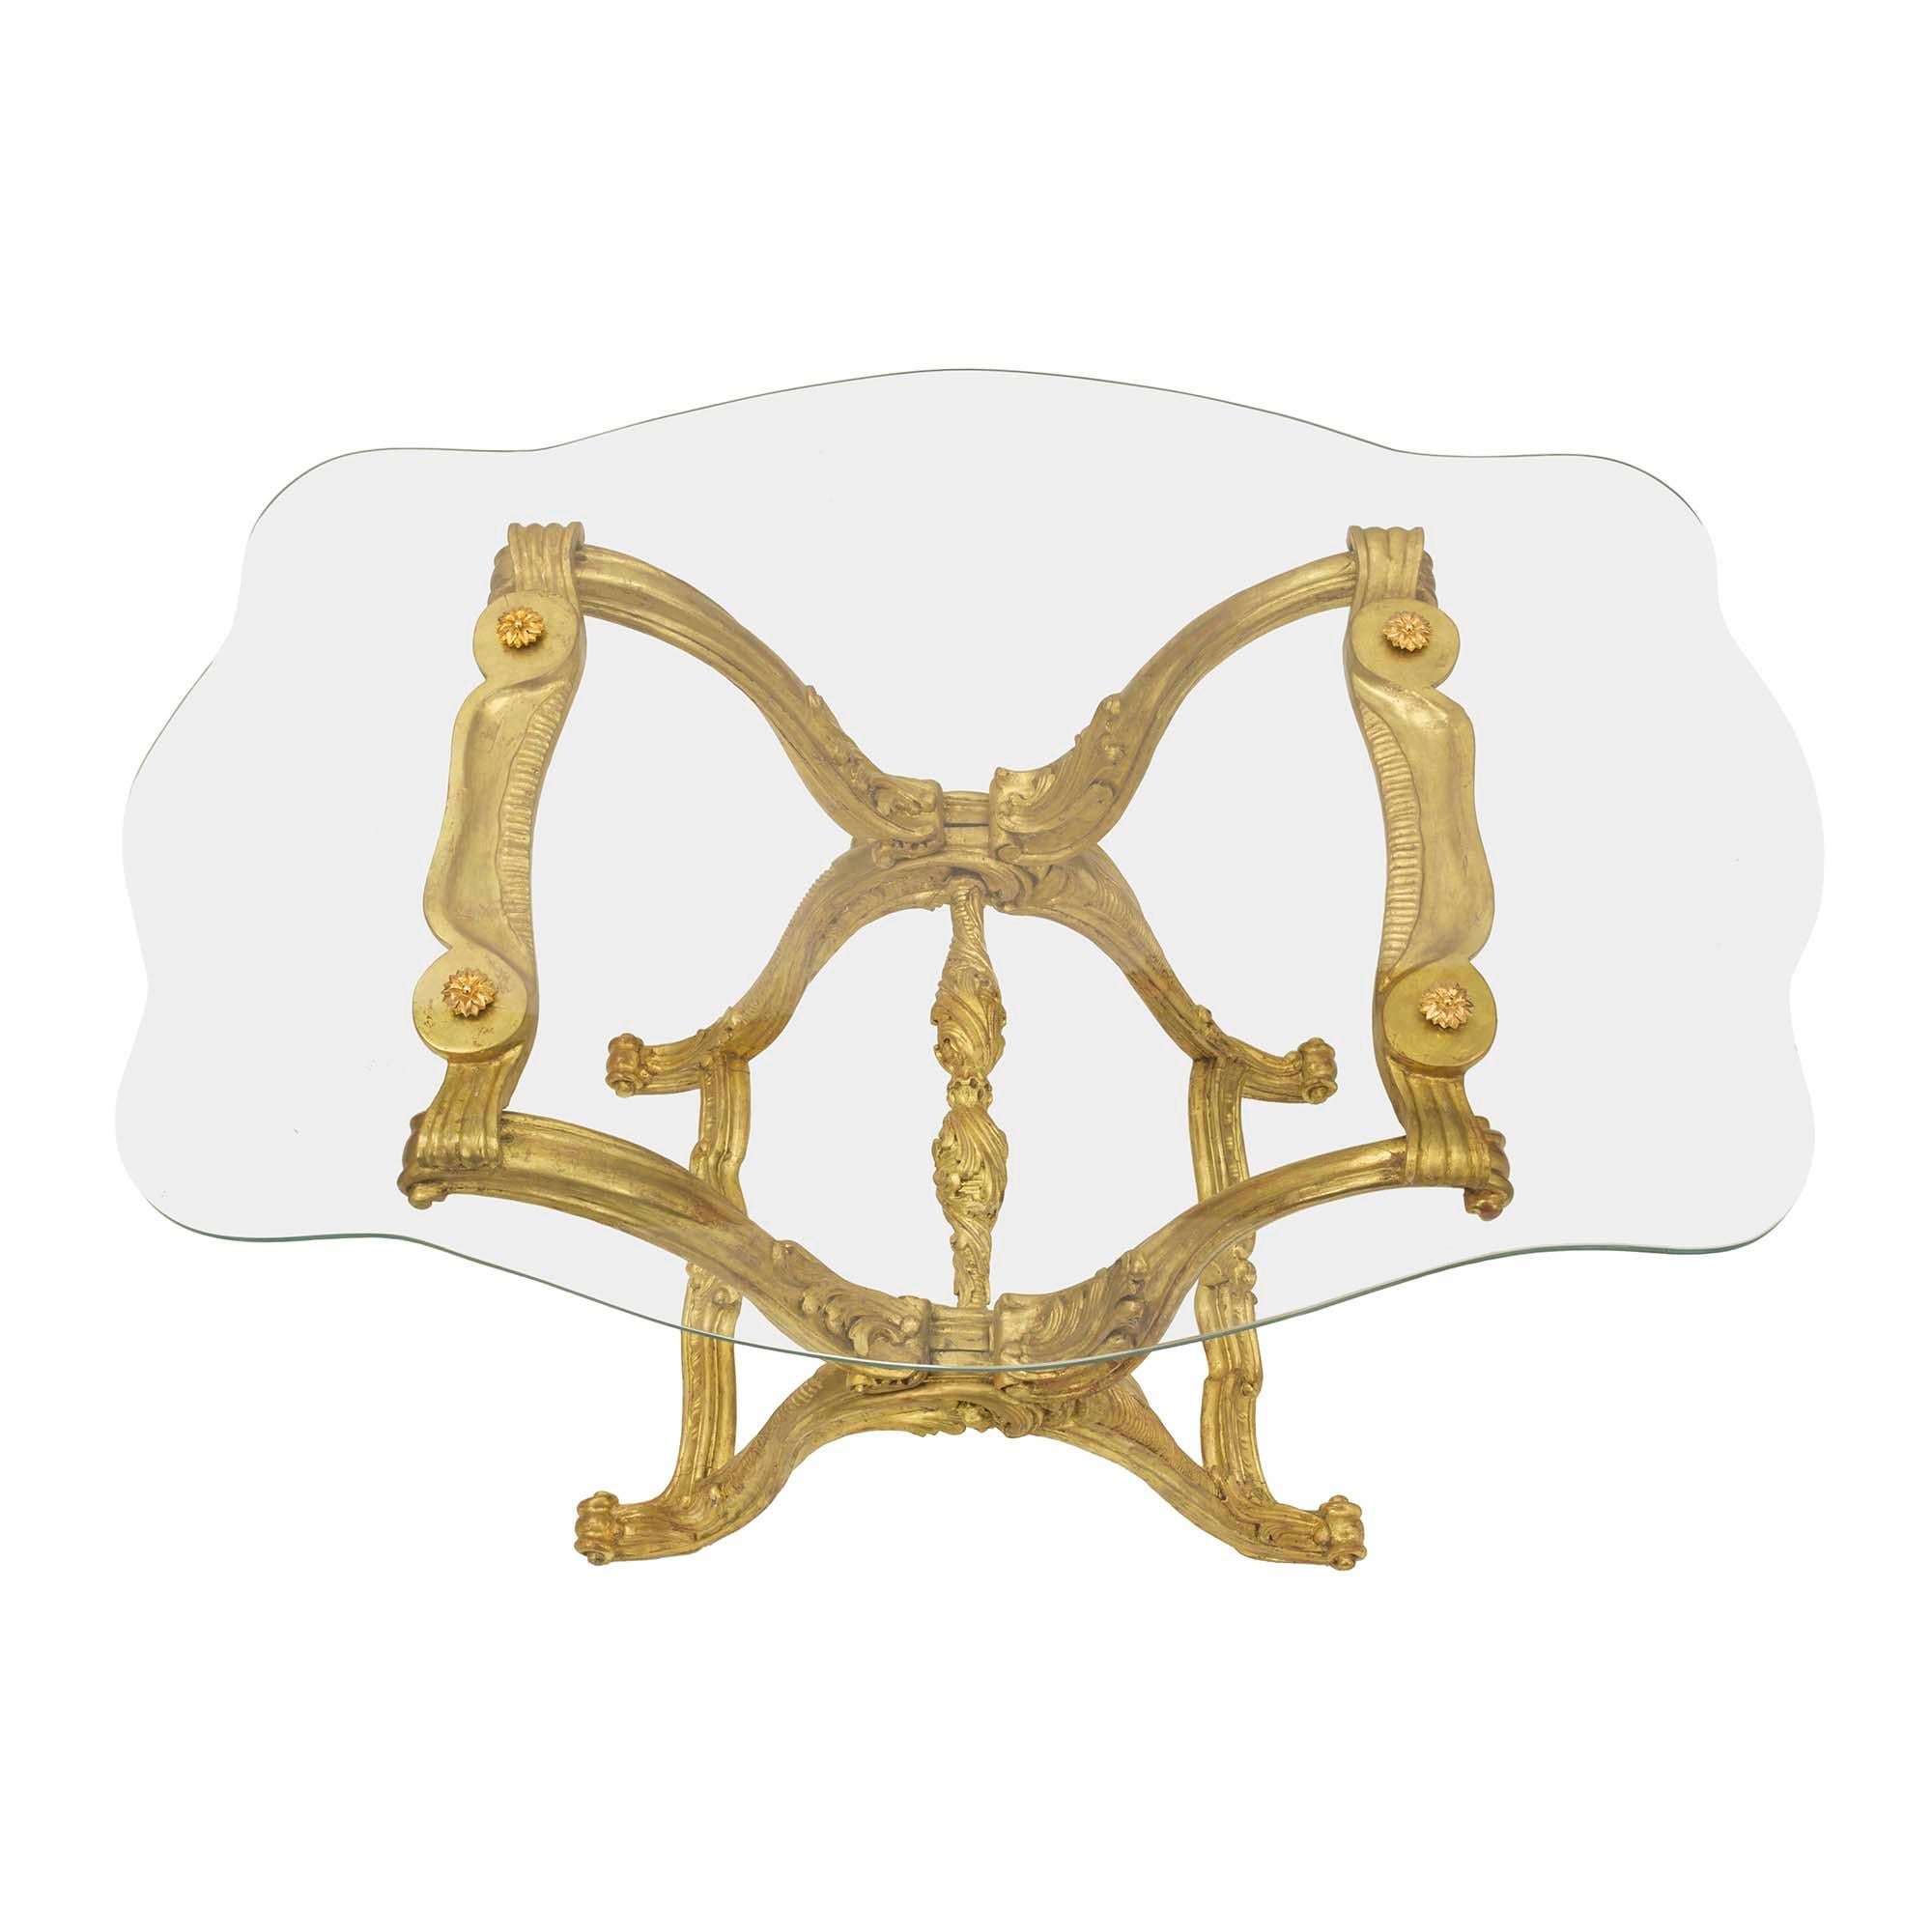 A most decorative and very unique Italian 19th century Baroque style giltwood and glass cocktail table. The table is raised by richly carved X shaped supports with striking scrolled movements and detailed carved foliate patterns and acanthus leaves